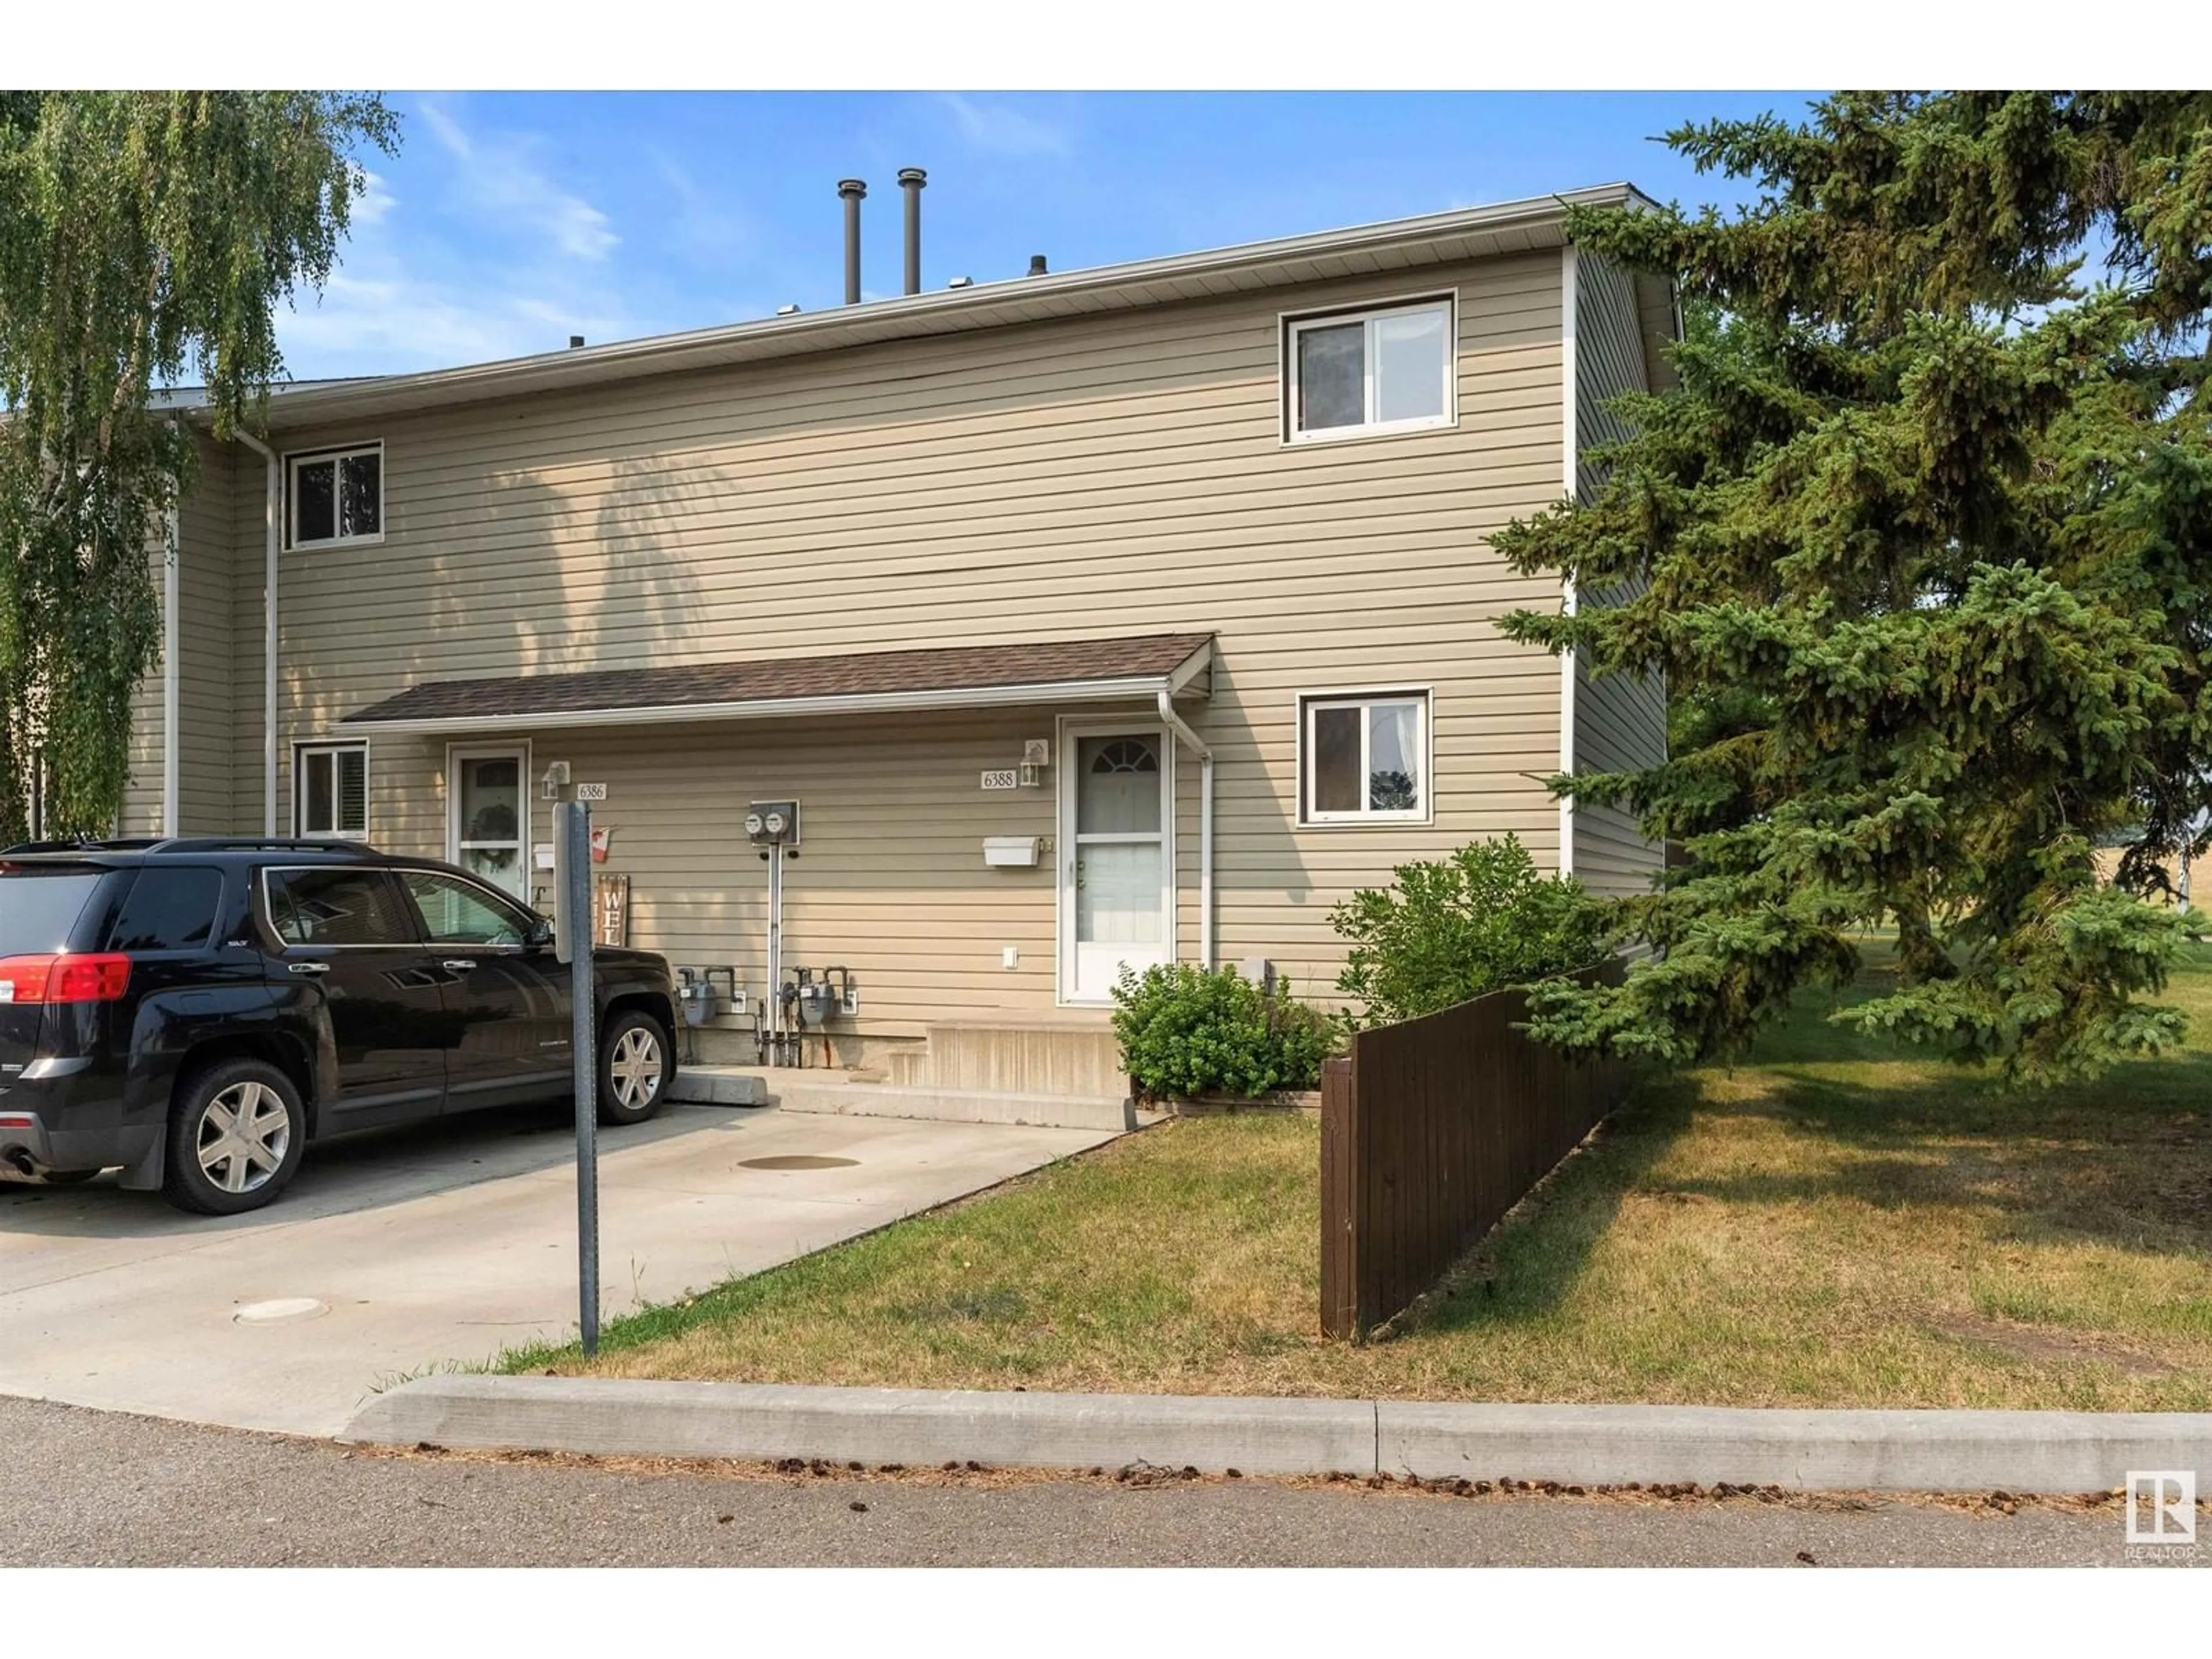 A pic from exterior of the house or condo for 6388 180 ST NW, Edmonton Alberta T5T2J6